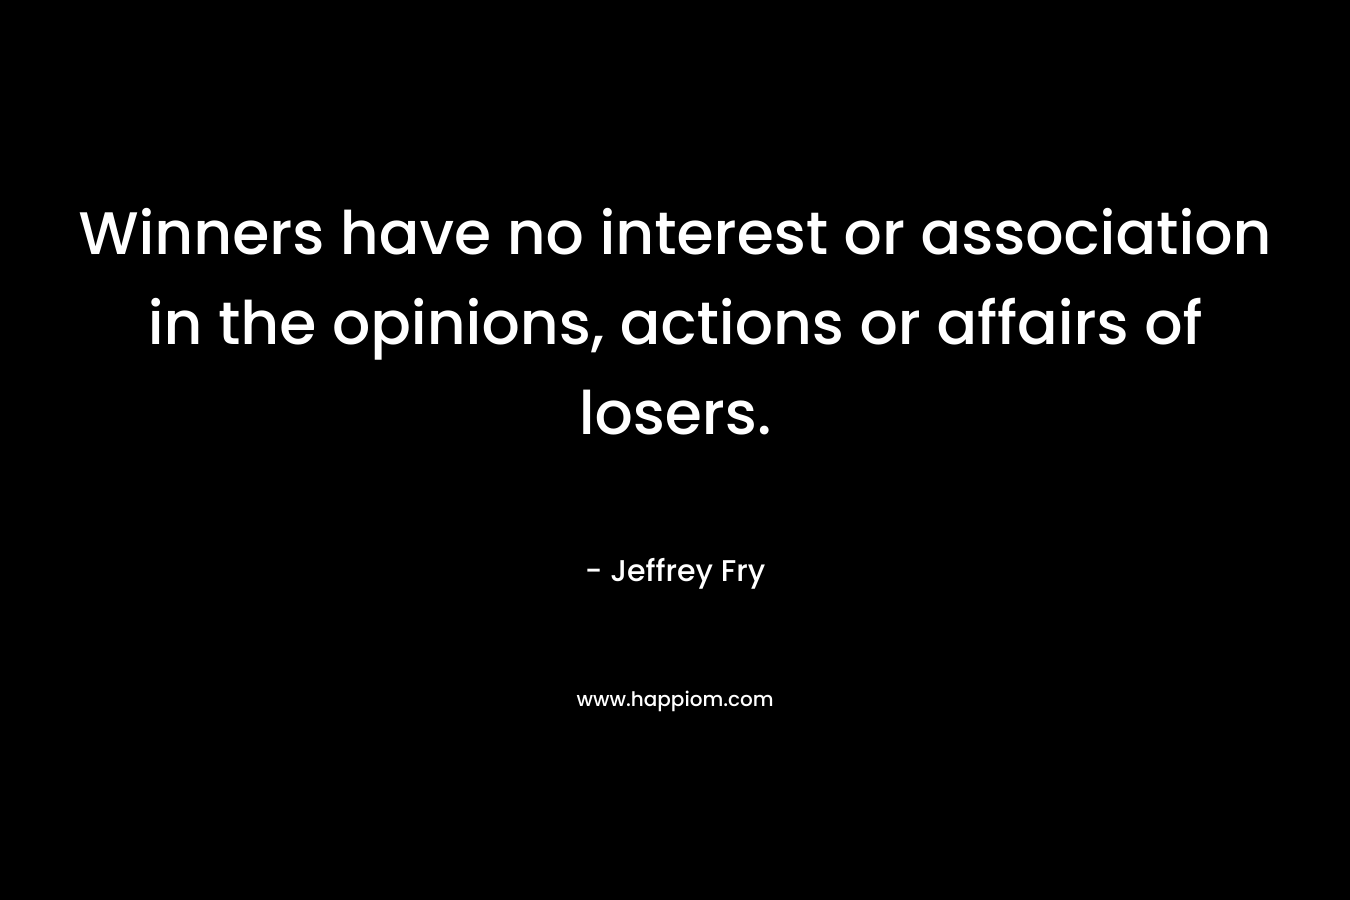 Winners have no interest or association in the opinions, actions or affairs of losers.